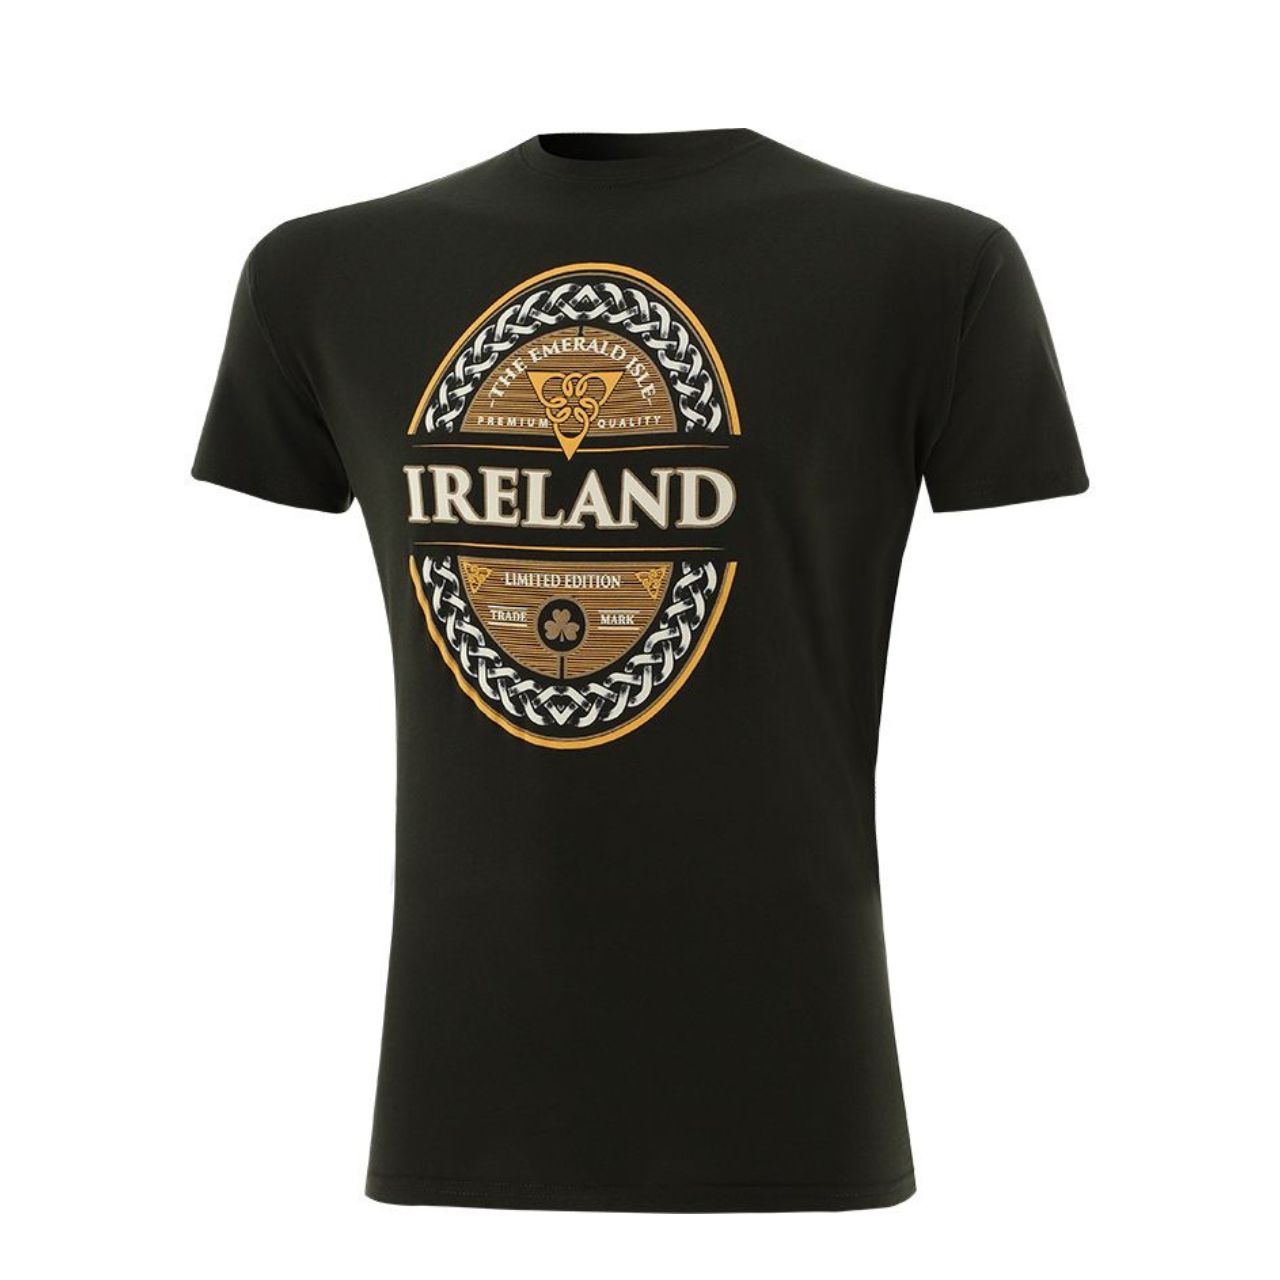 Crafted from 100% cotton, the Ireland Emerald Isle Label T-Shirt is a superb Irish souvenir, boasting a Celtic knot motif and the country's name printed on the front. Designed for maximum comfort and style, it makes for an impeccable gift.